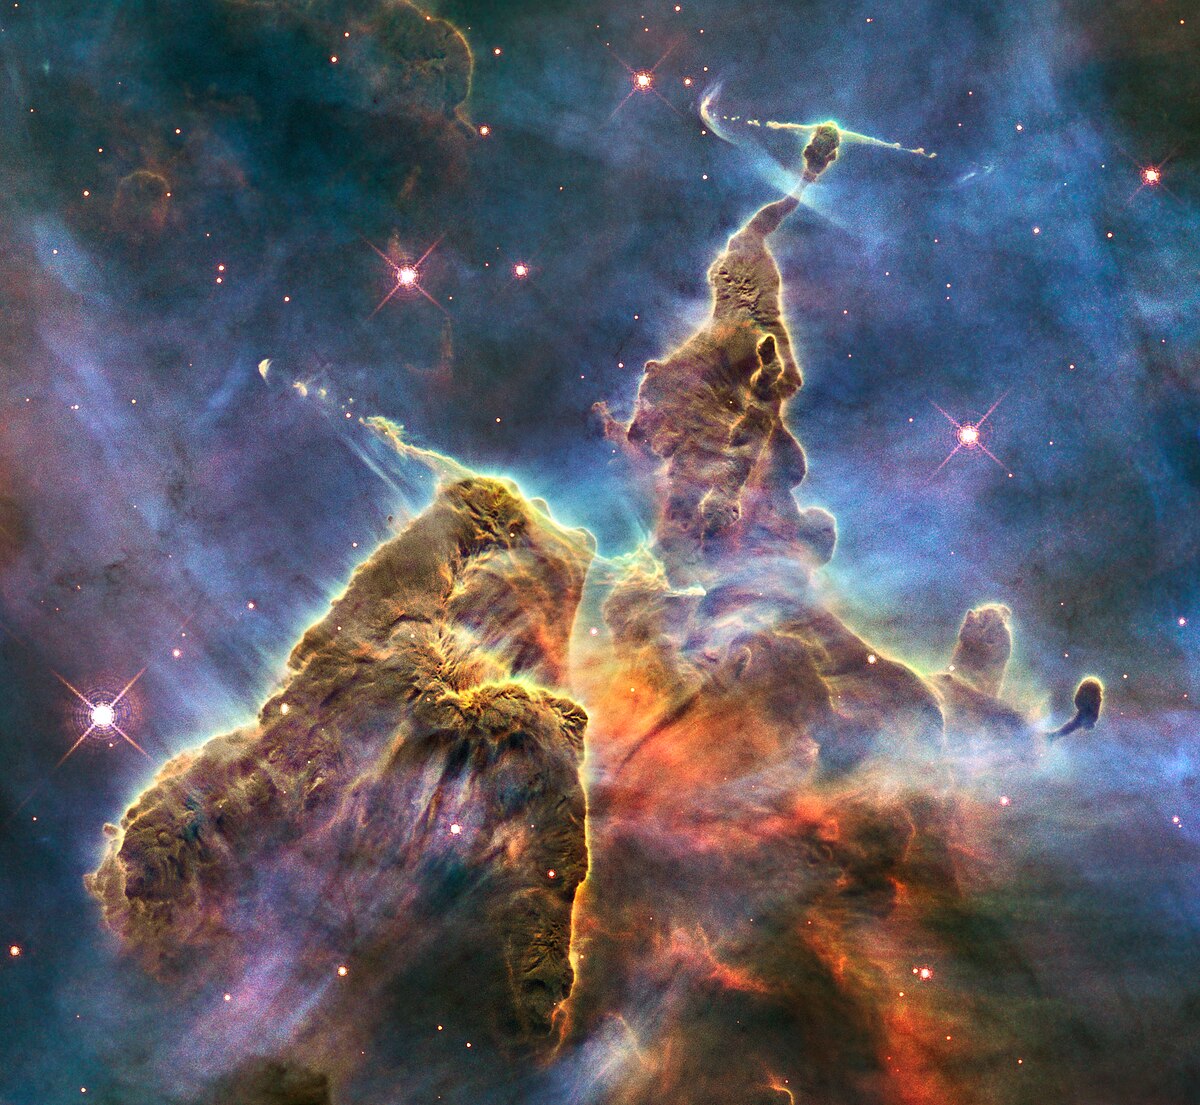 Tiedosto:HH 901 and HH 902 in the Carina nebula (captured by the Hubble  Space Telescope).jpg – Wikipedia